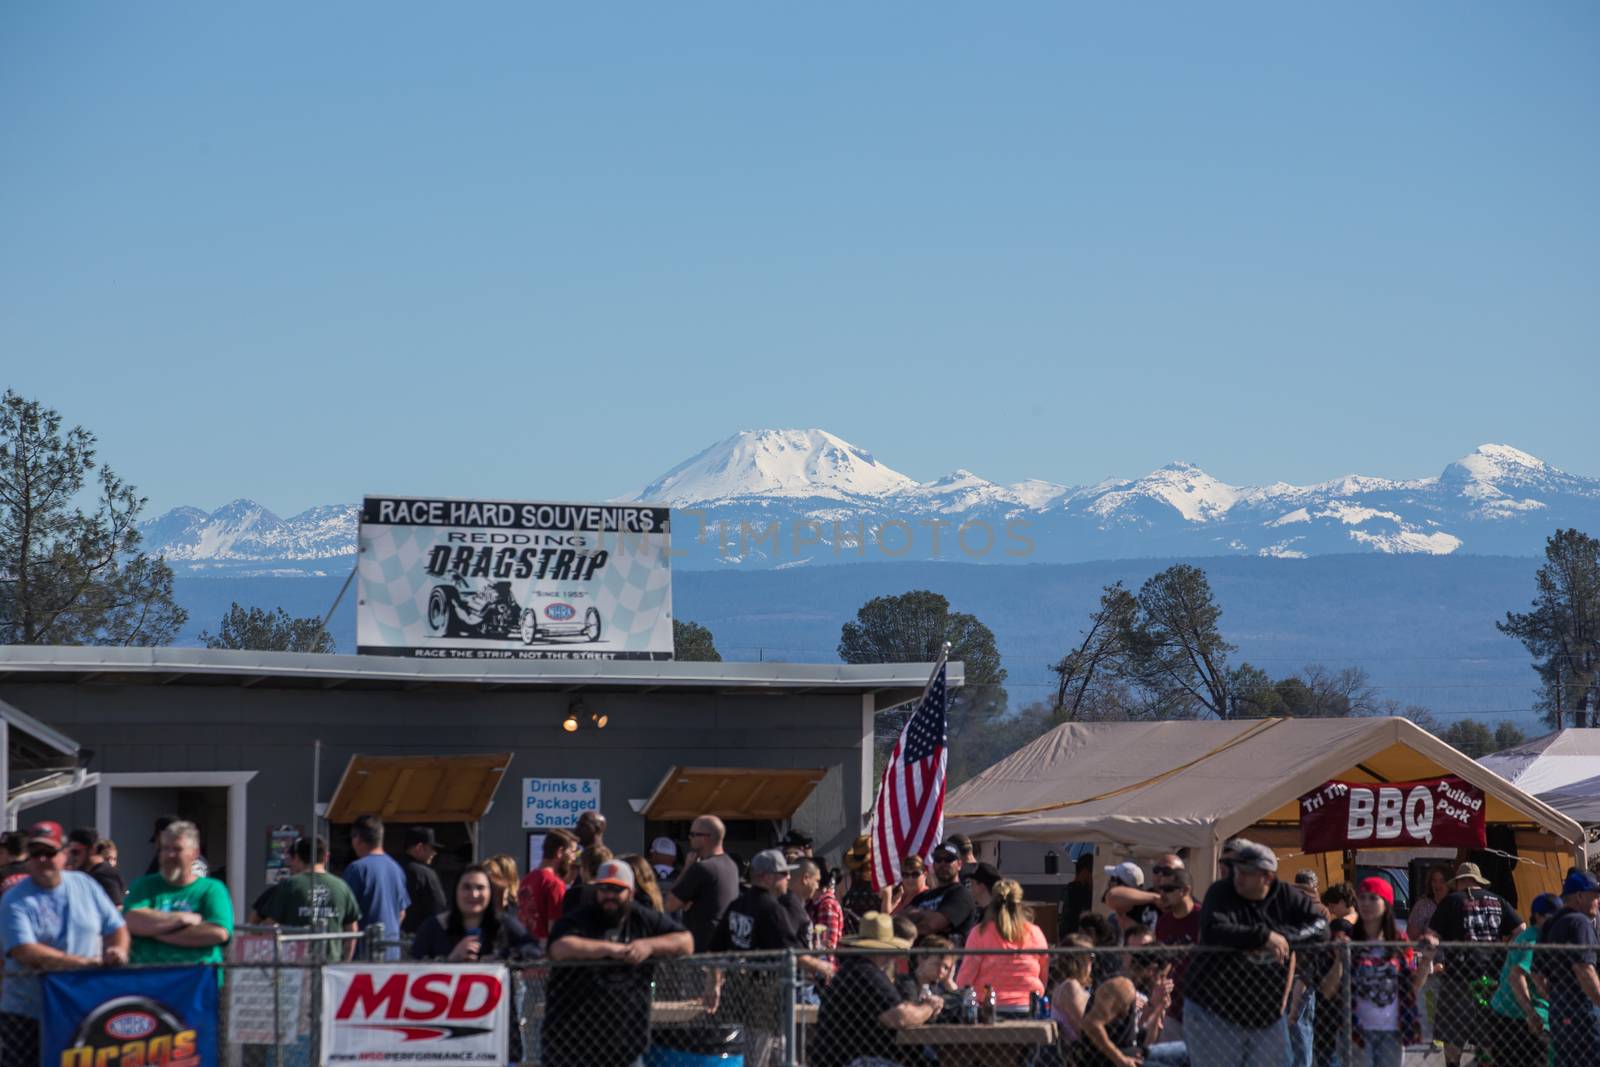 Redding, California: The crowd watches the drag races on a sunny winter day with Mt. Lassen's snow covered peaks in the distance.
Photo taken on: February 13th, 2016